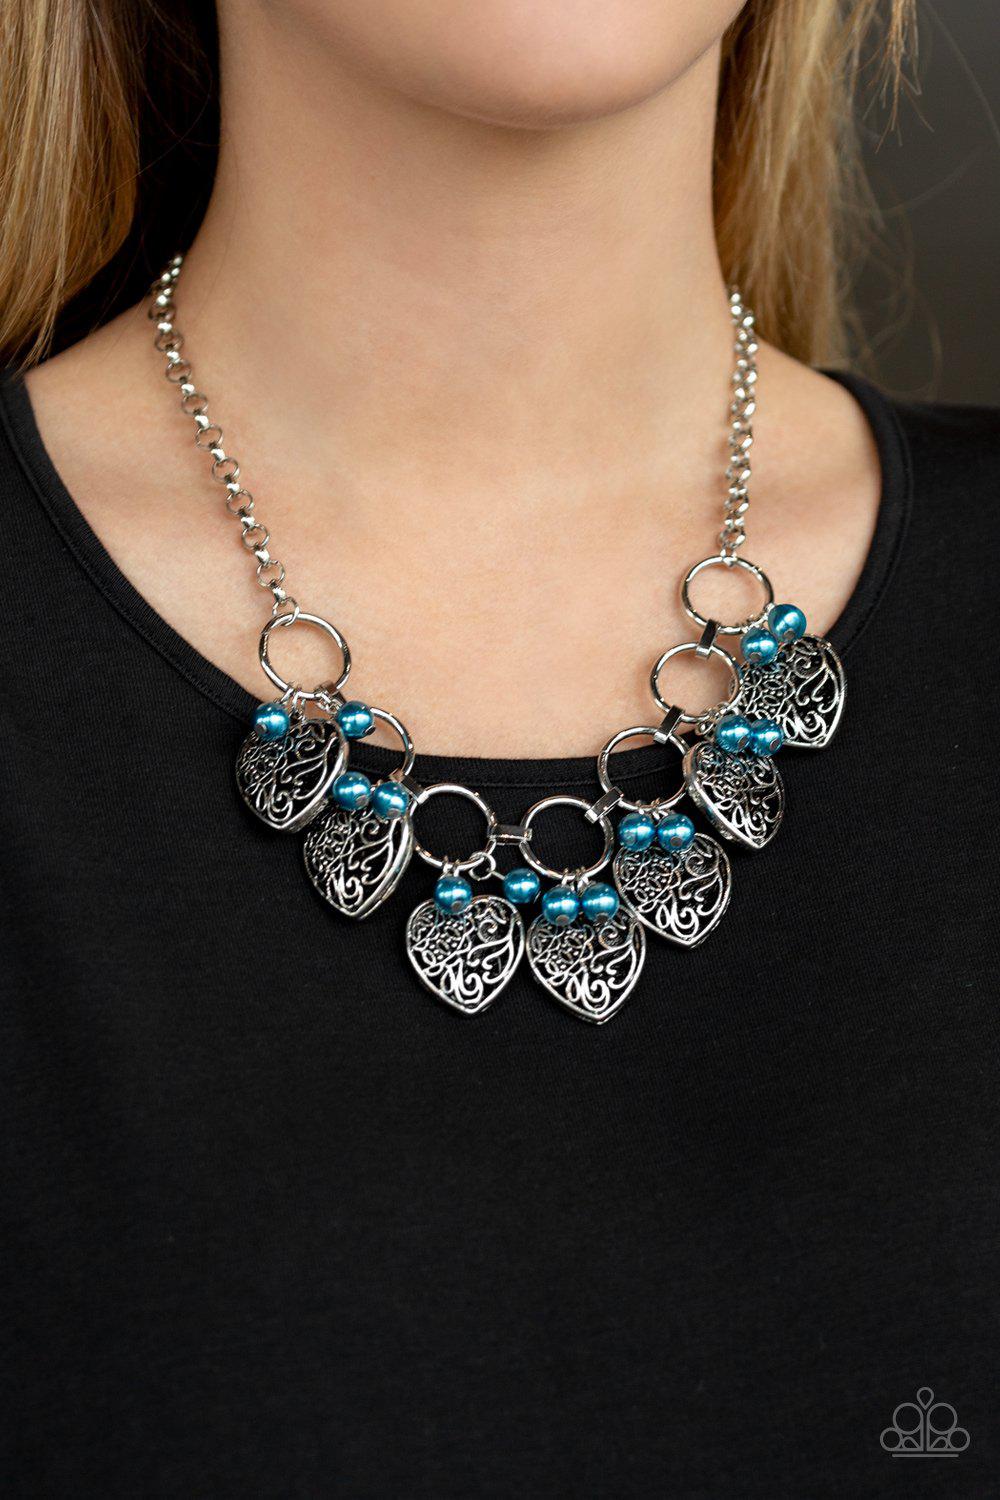 Very Valentine Blue and Silver Heart Necklace - Paparazzi Accessories-CarasShop.com - $5 Jewelry by Cara Jewels